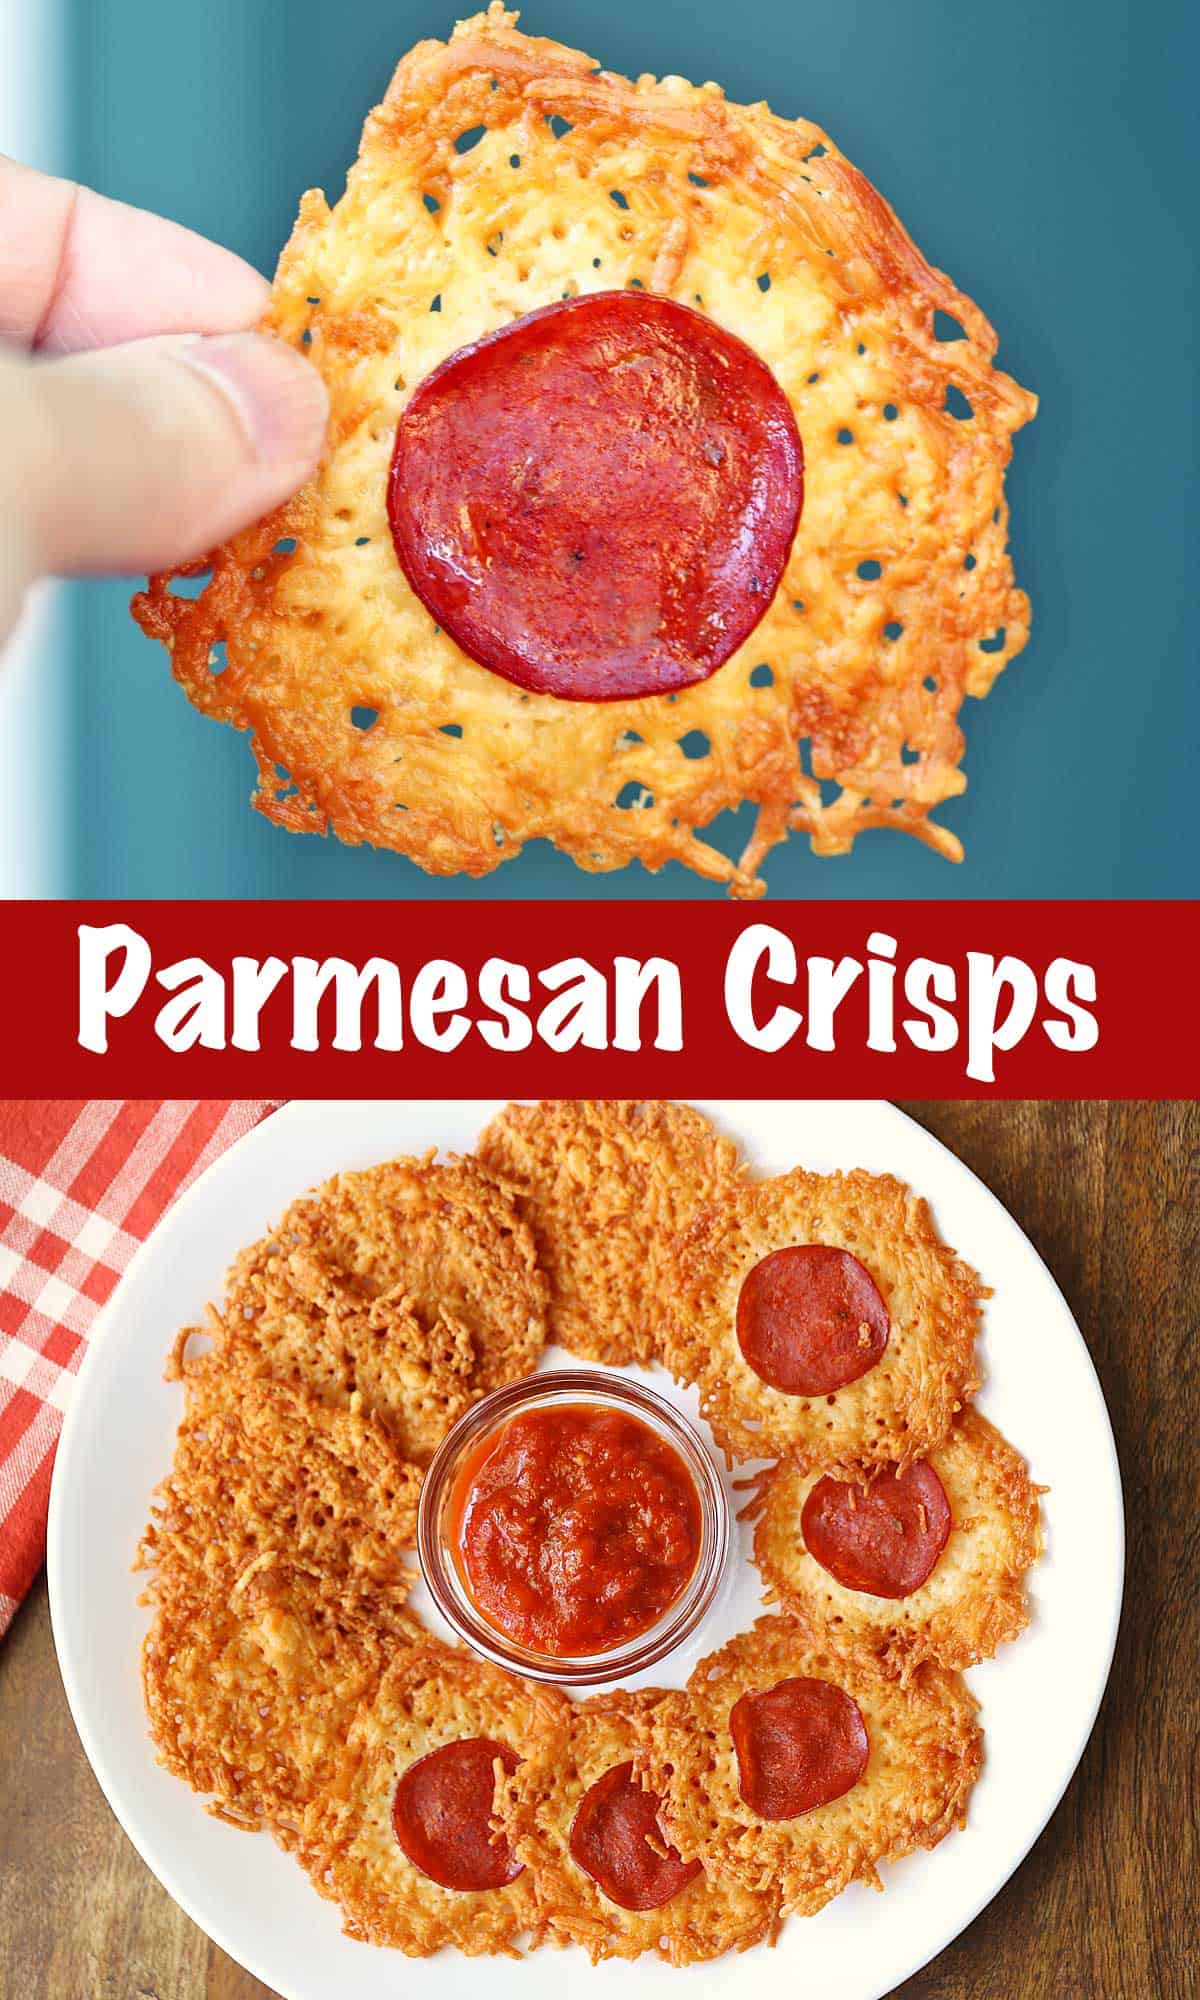 A two-photo collage of parmesan crisps, one with a crisp held up in the air, and one with crisps served on a plate.